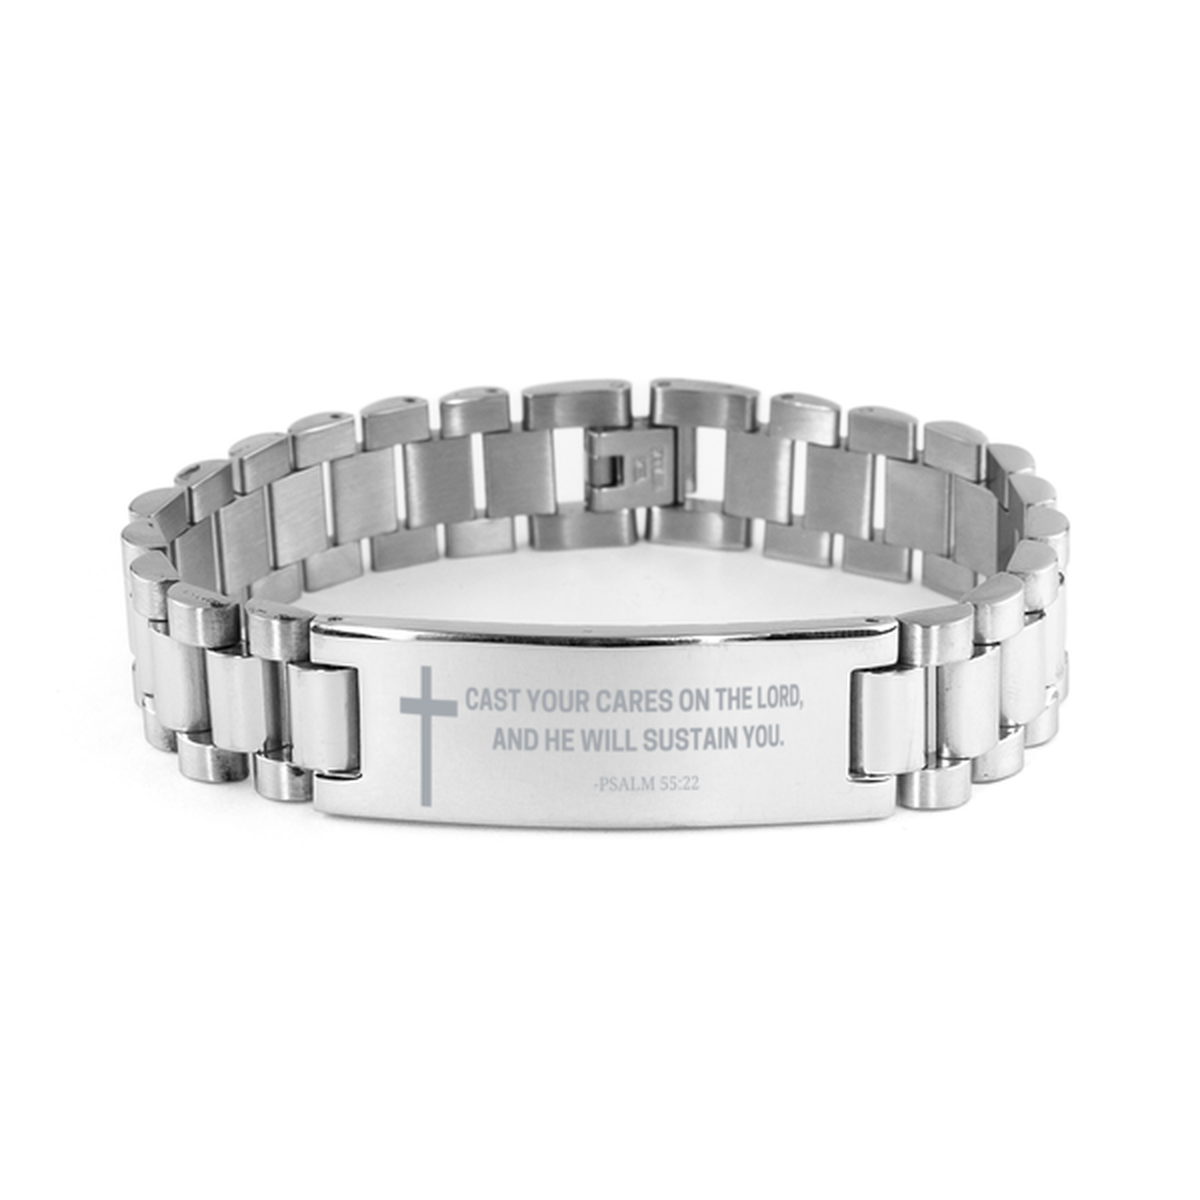 Baptism Gifts For Teenage Boys Girls, Christian Bible Verse Ladder Stainless Steel Bracelet, Cast your cares on the Lord, Catholic Confirmation Gifts for Son, Godson, Grandson, Nephew